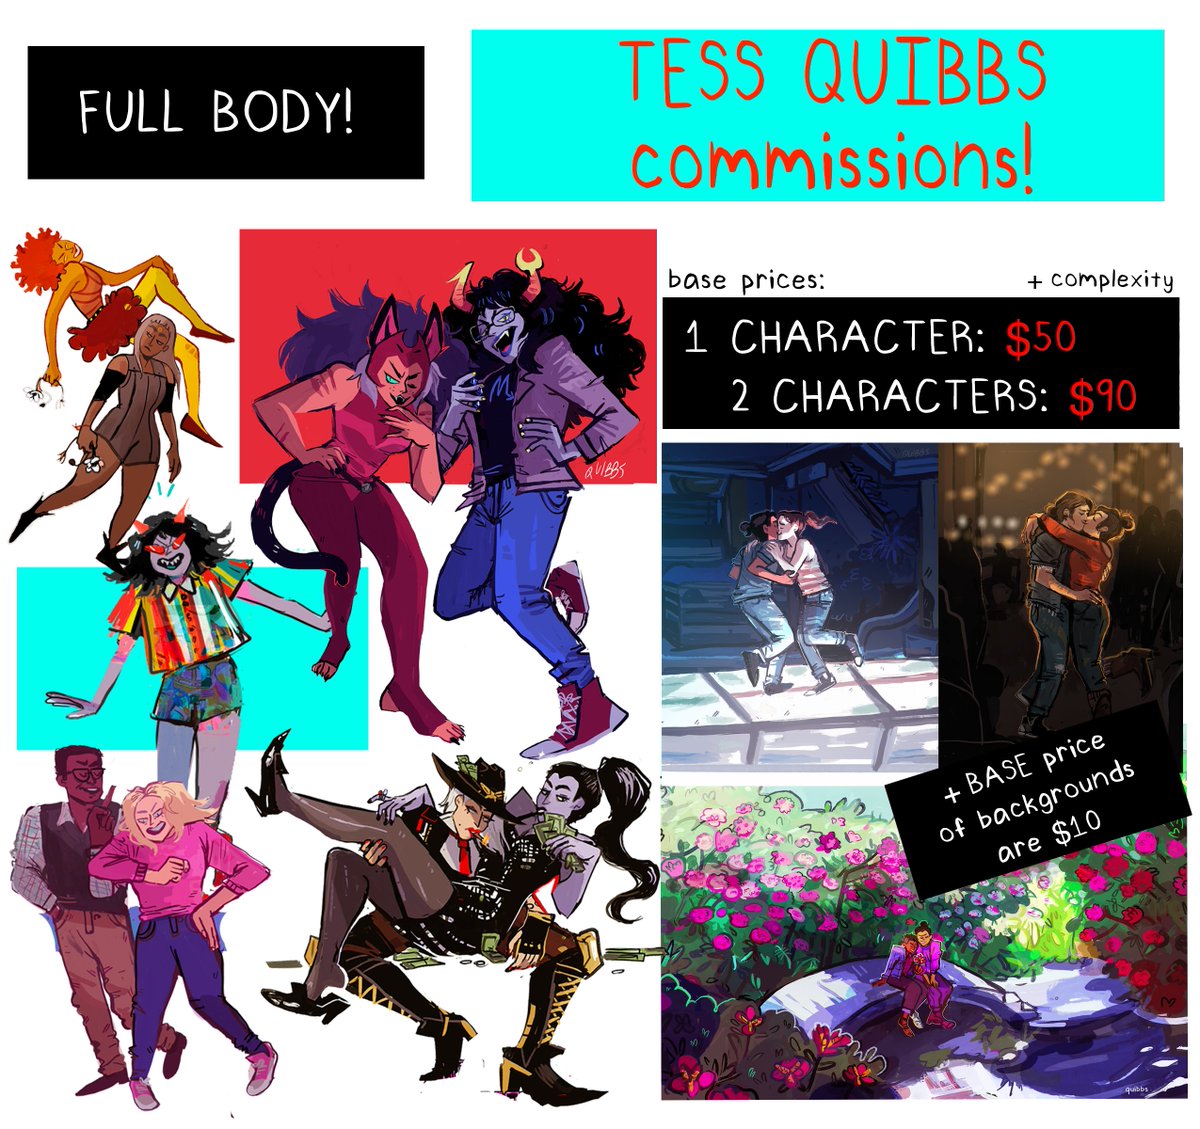 I UPDATED MY COMMISSION INFO!!! just tweaked some prices and stuff!

email me at quibblette@yahoo.com for questions and character details!!! ✨✨i have no commission slots, i just go ham✨✨

icons/portraits: $25/ half body: $35/ full body: $50 